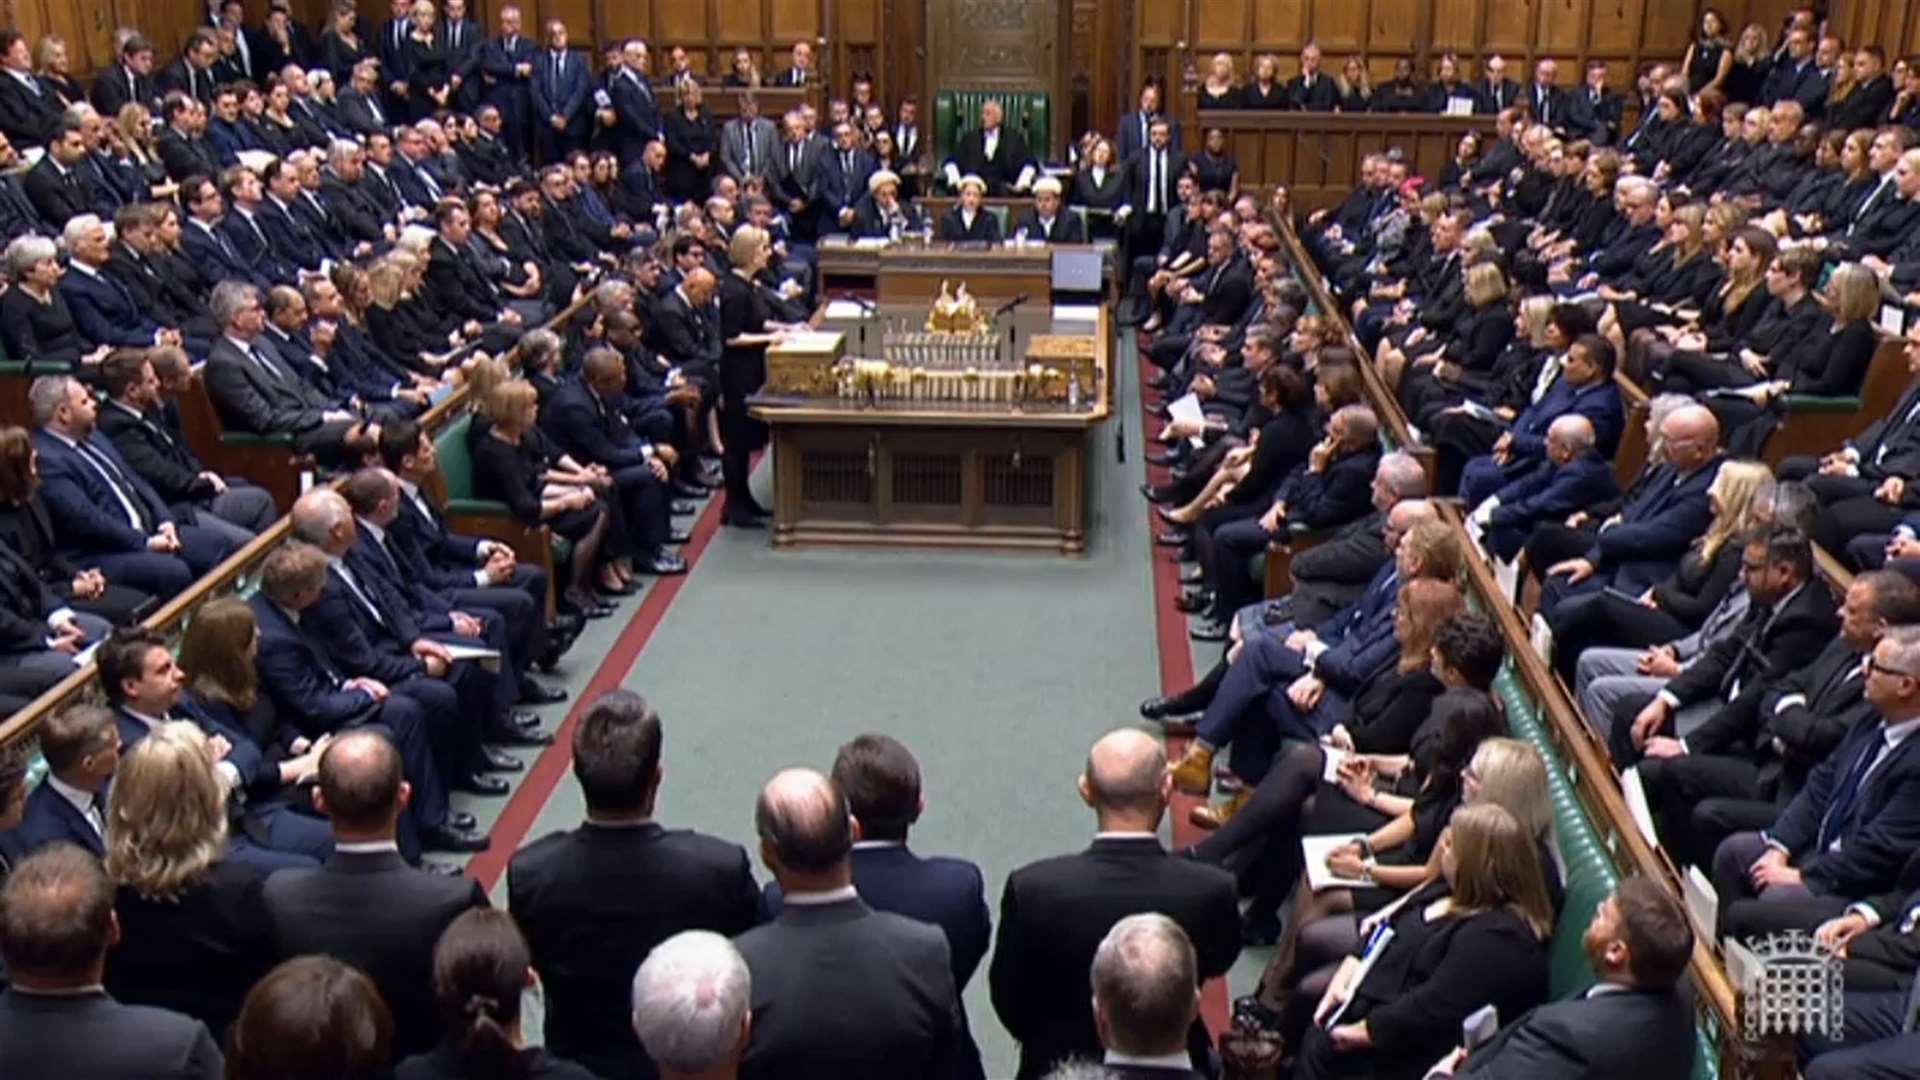 The Commons was packed as MPs paid tribute to the Queen (PA)